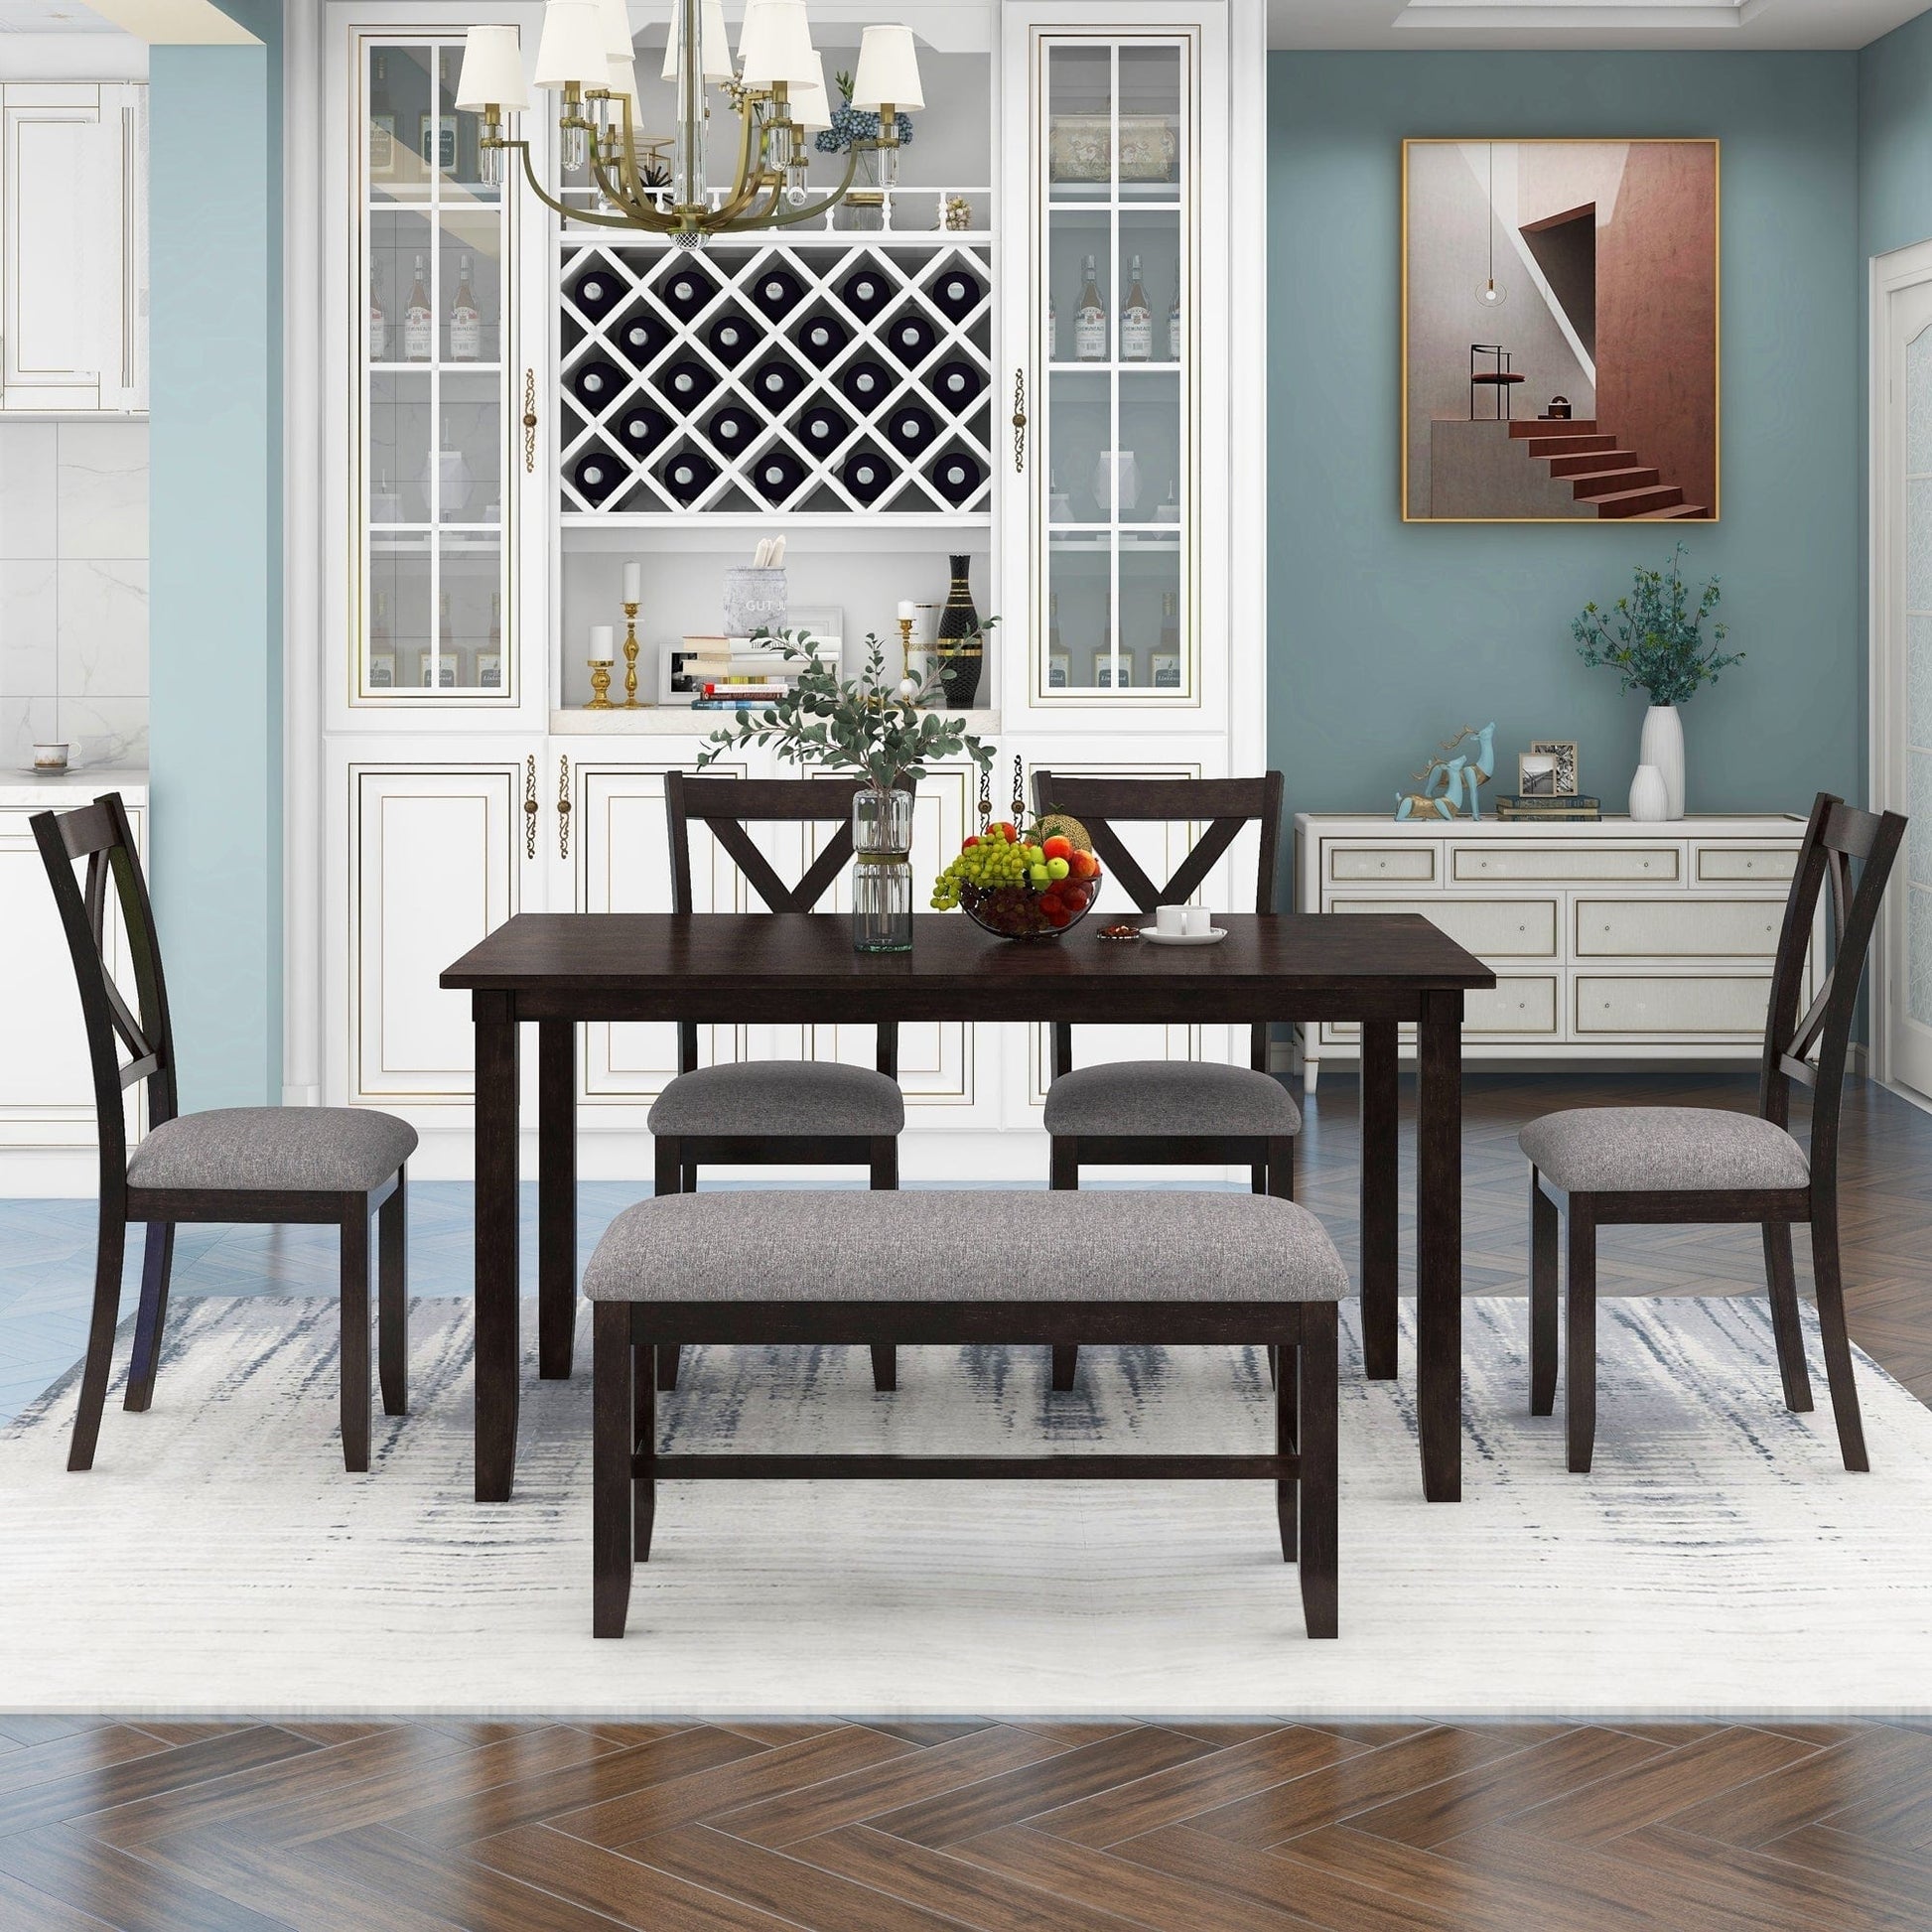 1st Choice Furniture Direct 1st Choice 6pc Kitchen Dining Table Wooden Rectangular Set in Espresso